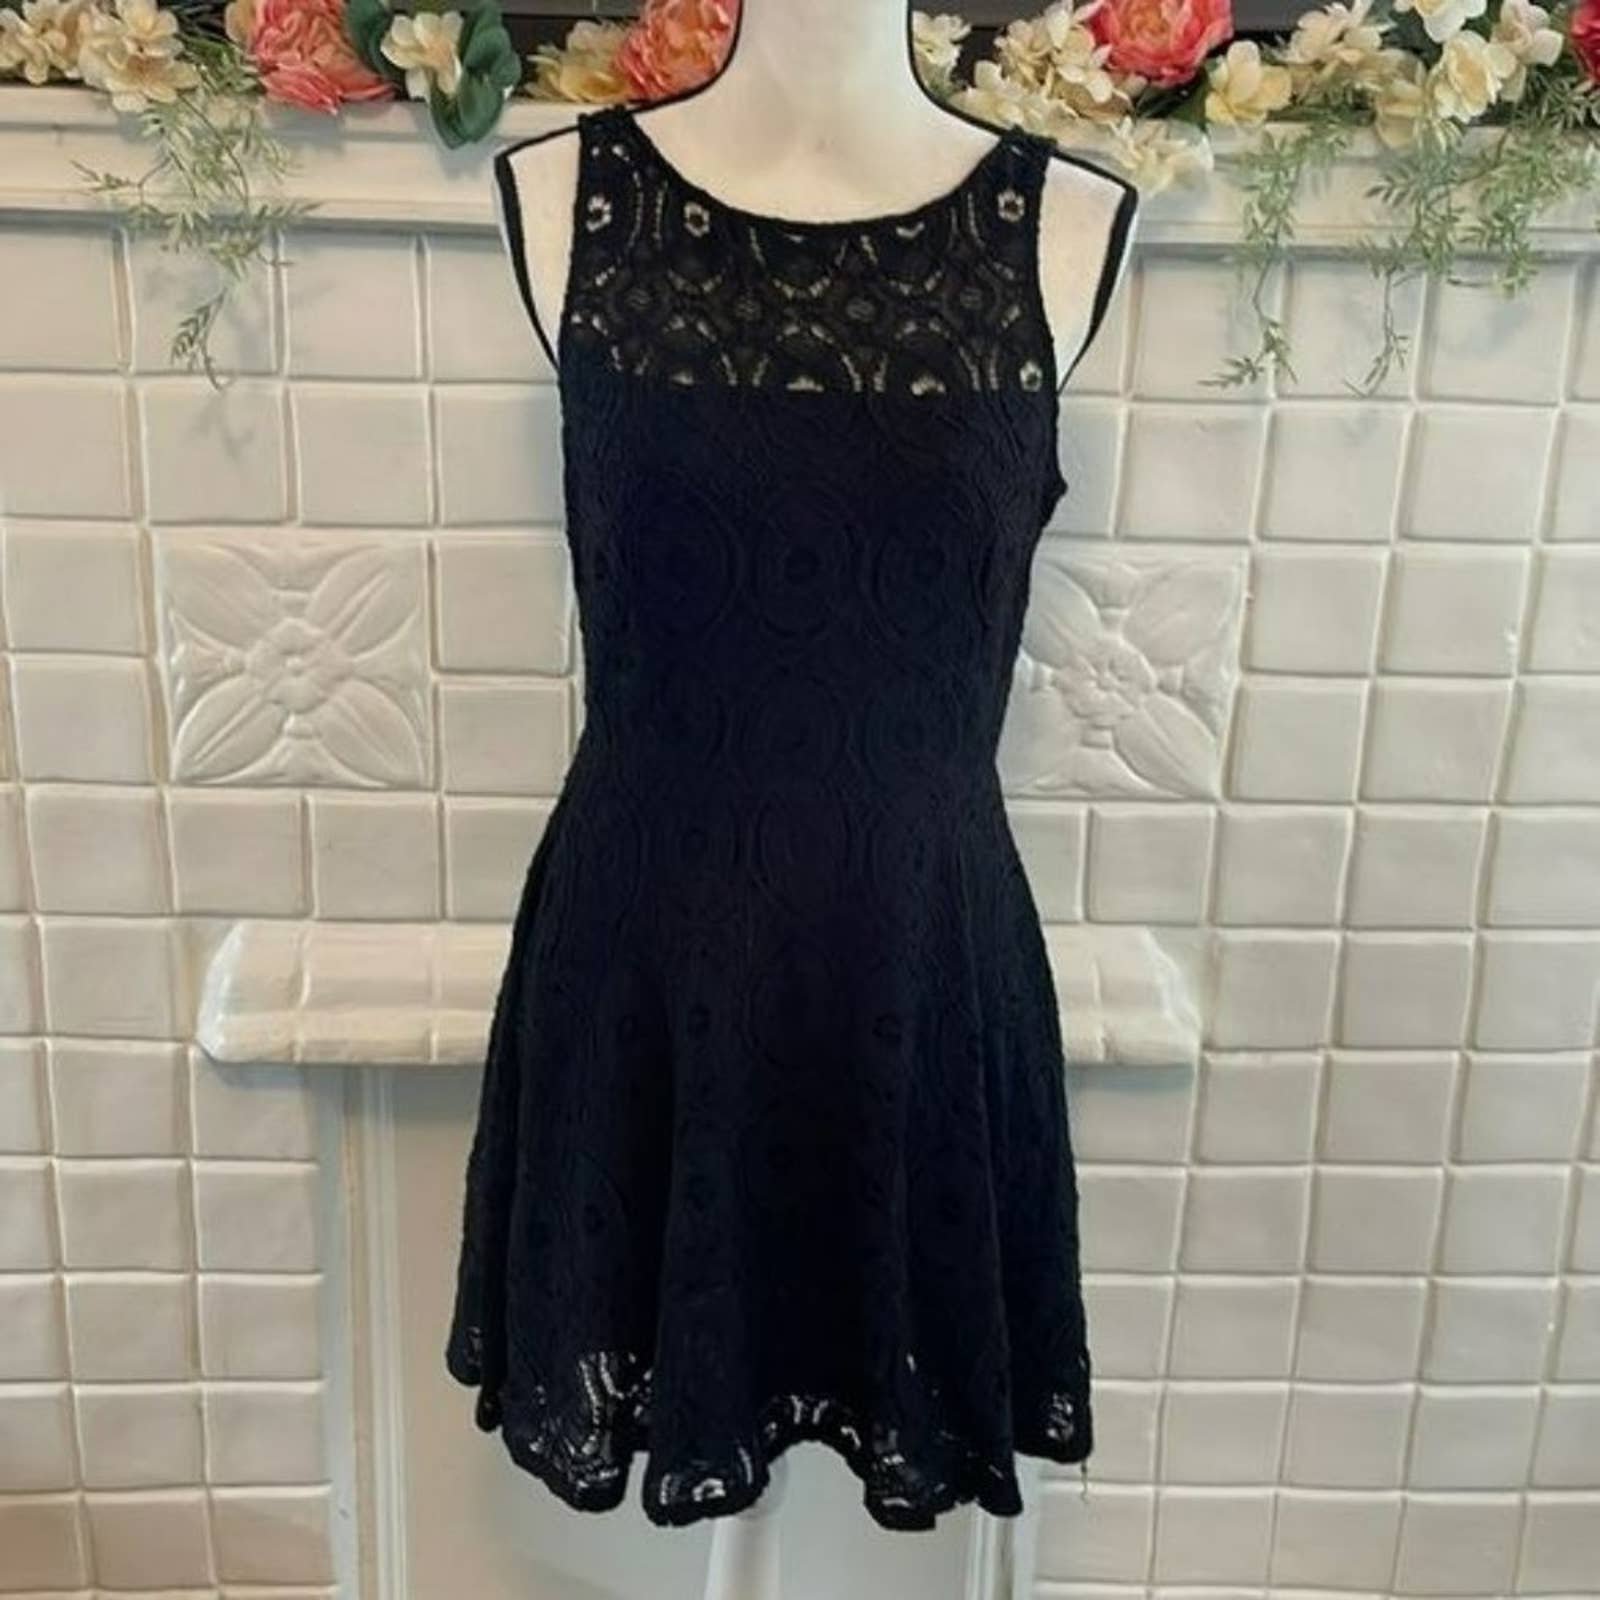 Affordable Helmut Lang Sleeveless Black Lace Dress OOmC